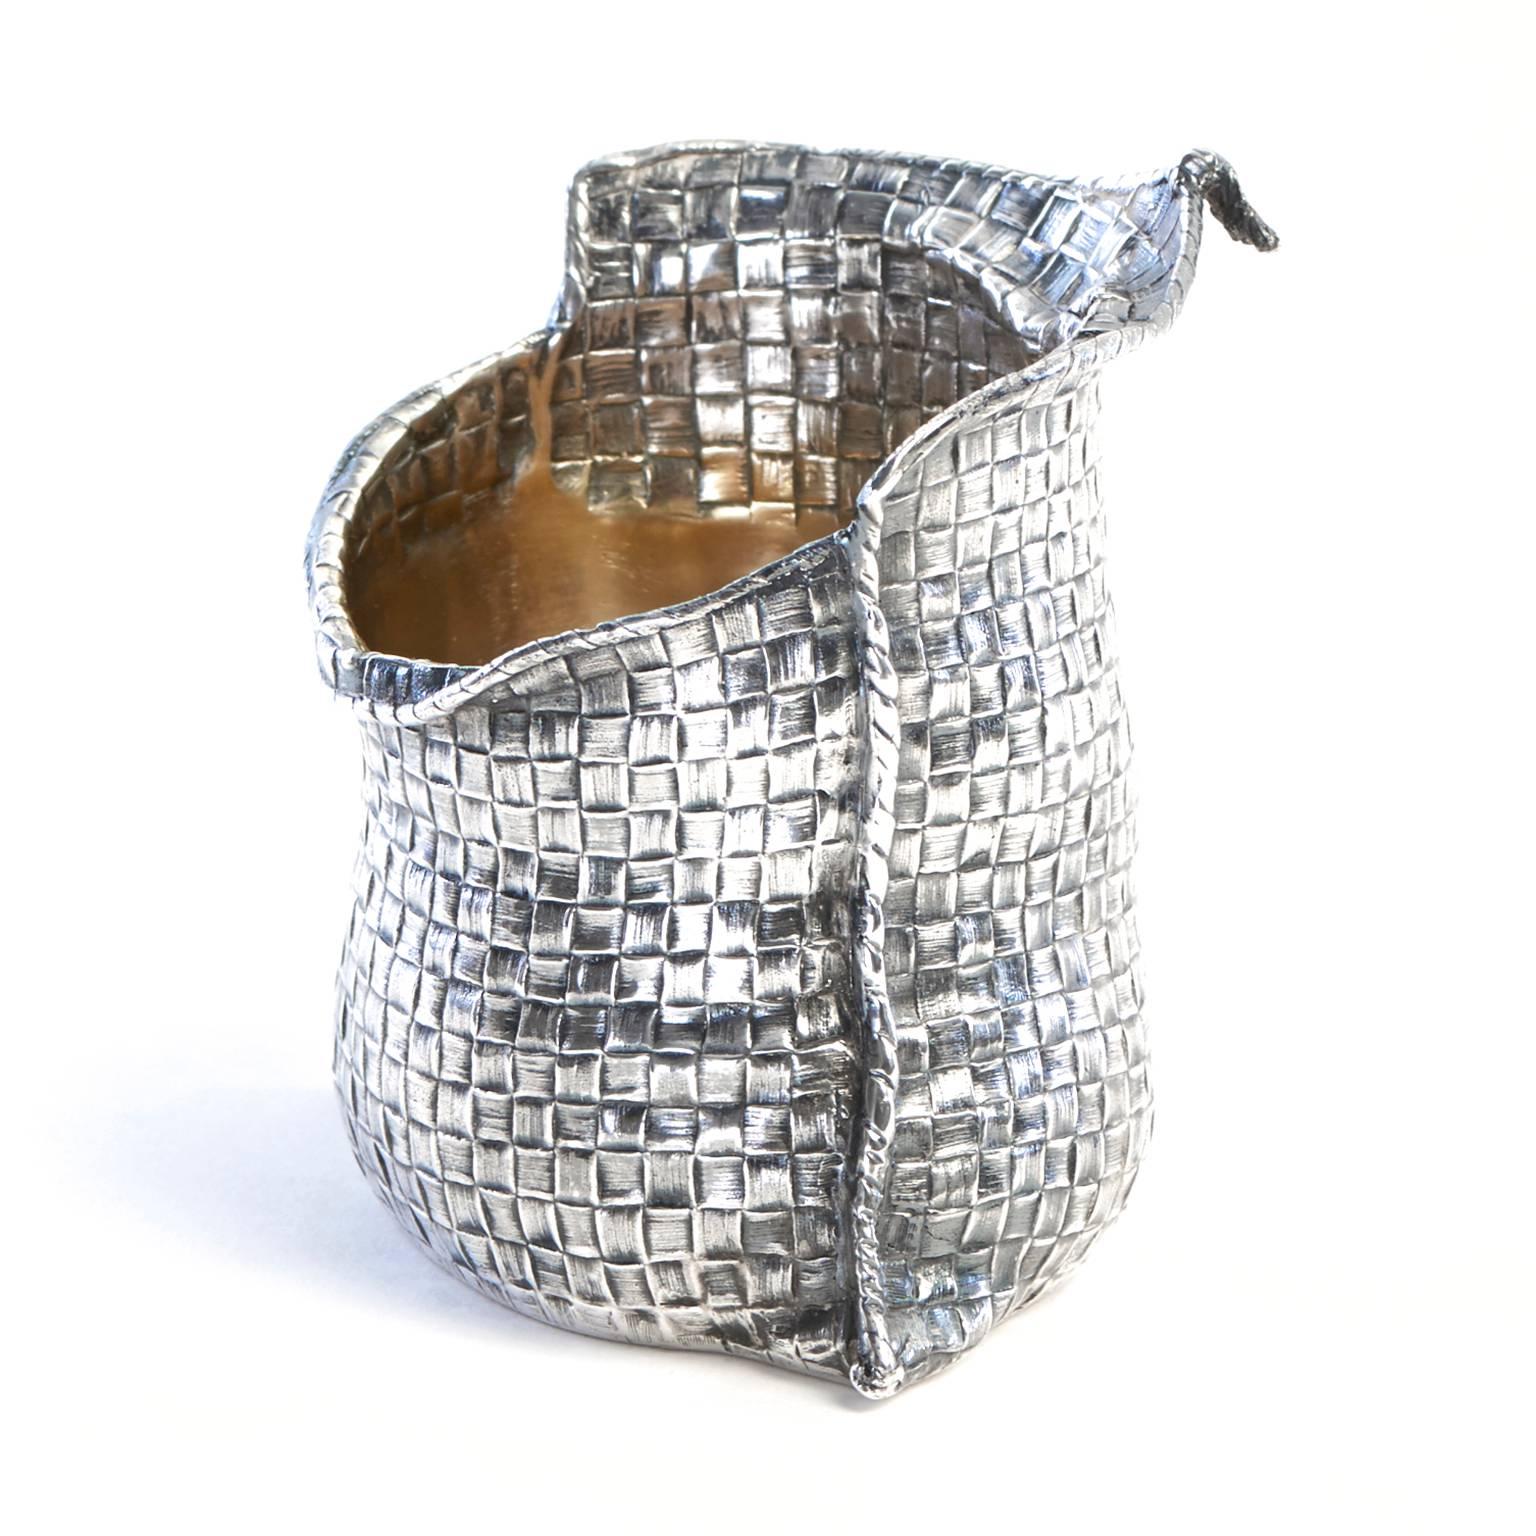 Sterling, Mario Buccellati, Italy, circa 1950s. This sterling figural sack is an unusual example of early Buccellati silver. Known for gorgeous quality silver-smithing and stunning design work, Mario Buccellati combined old world craftsmanship with